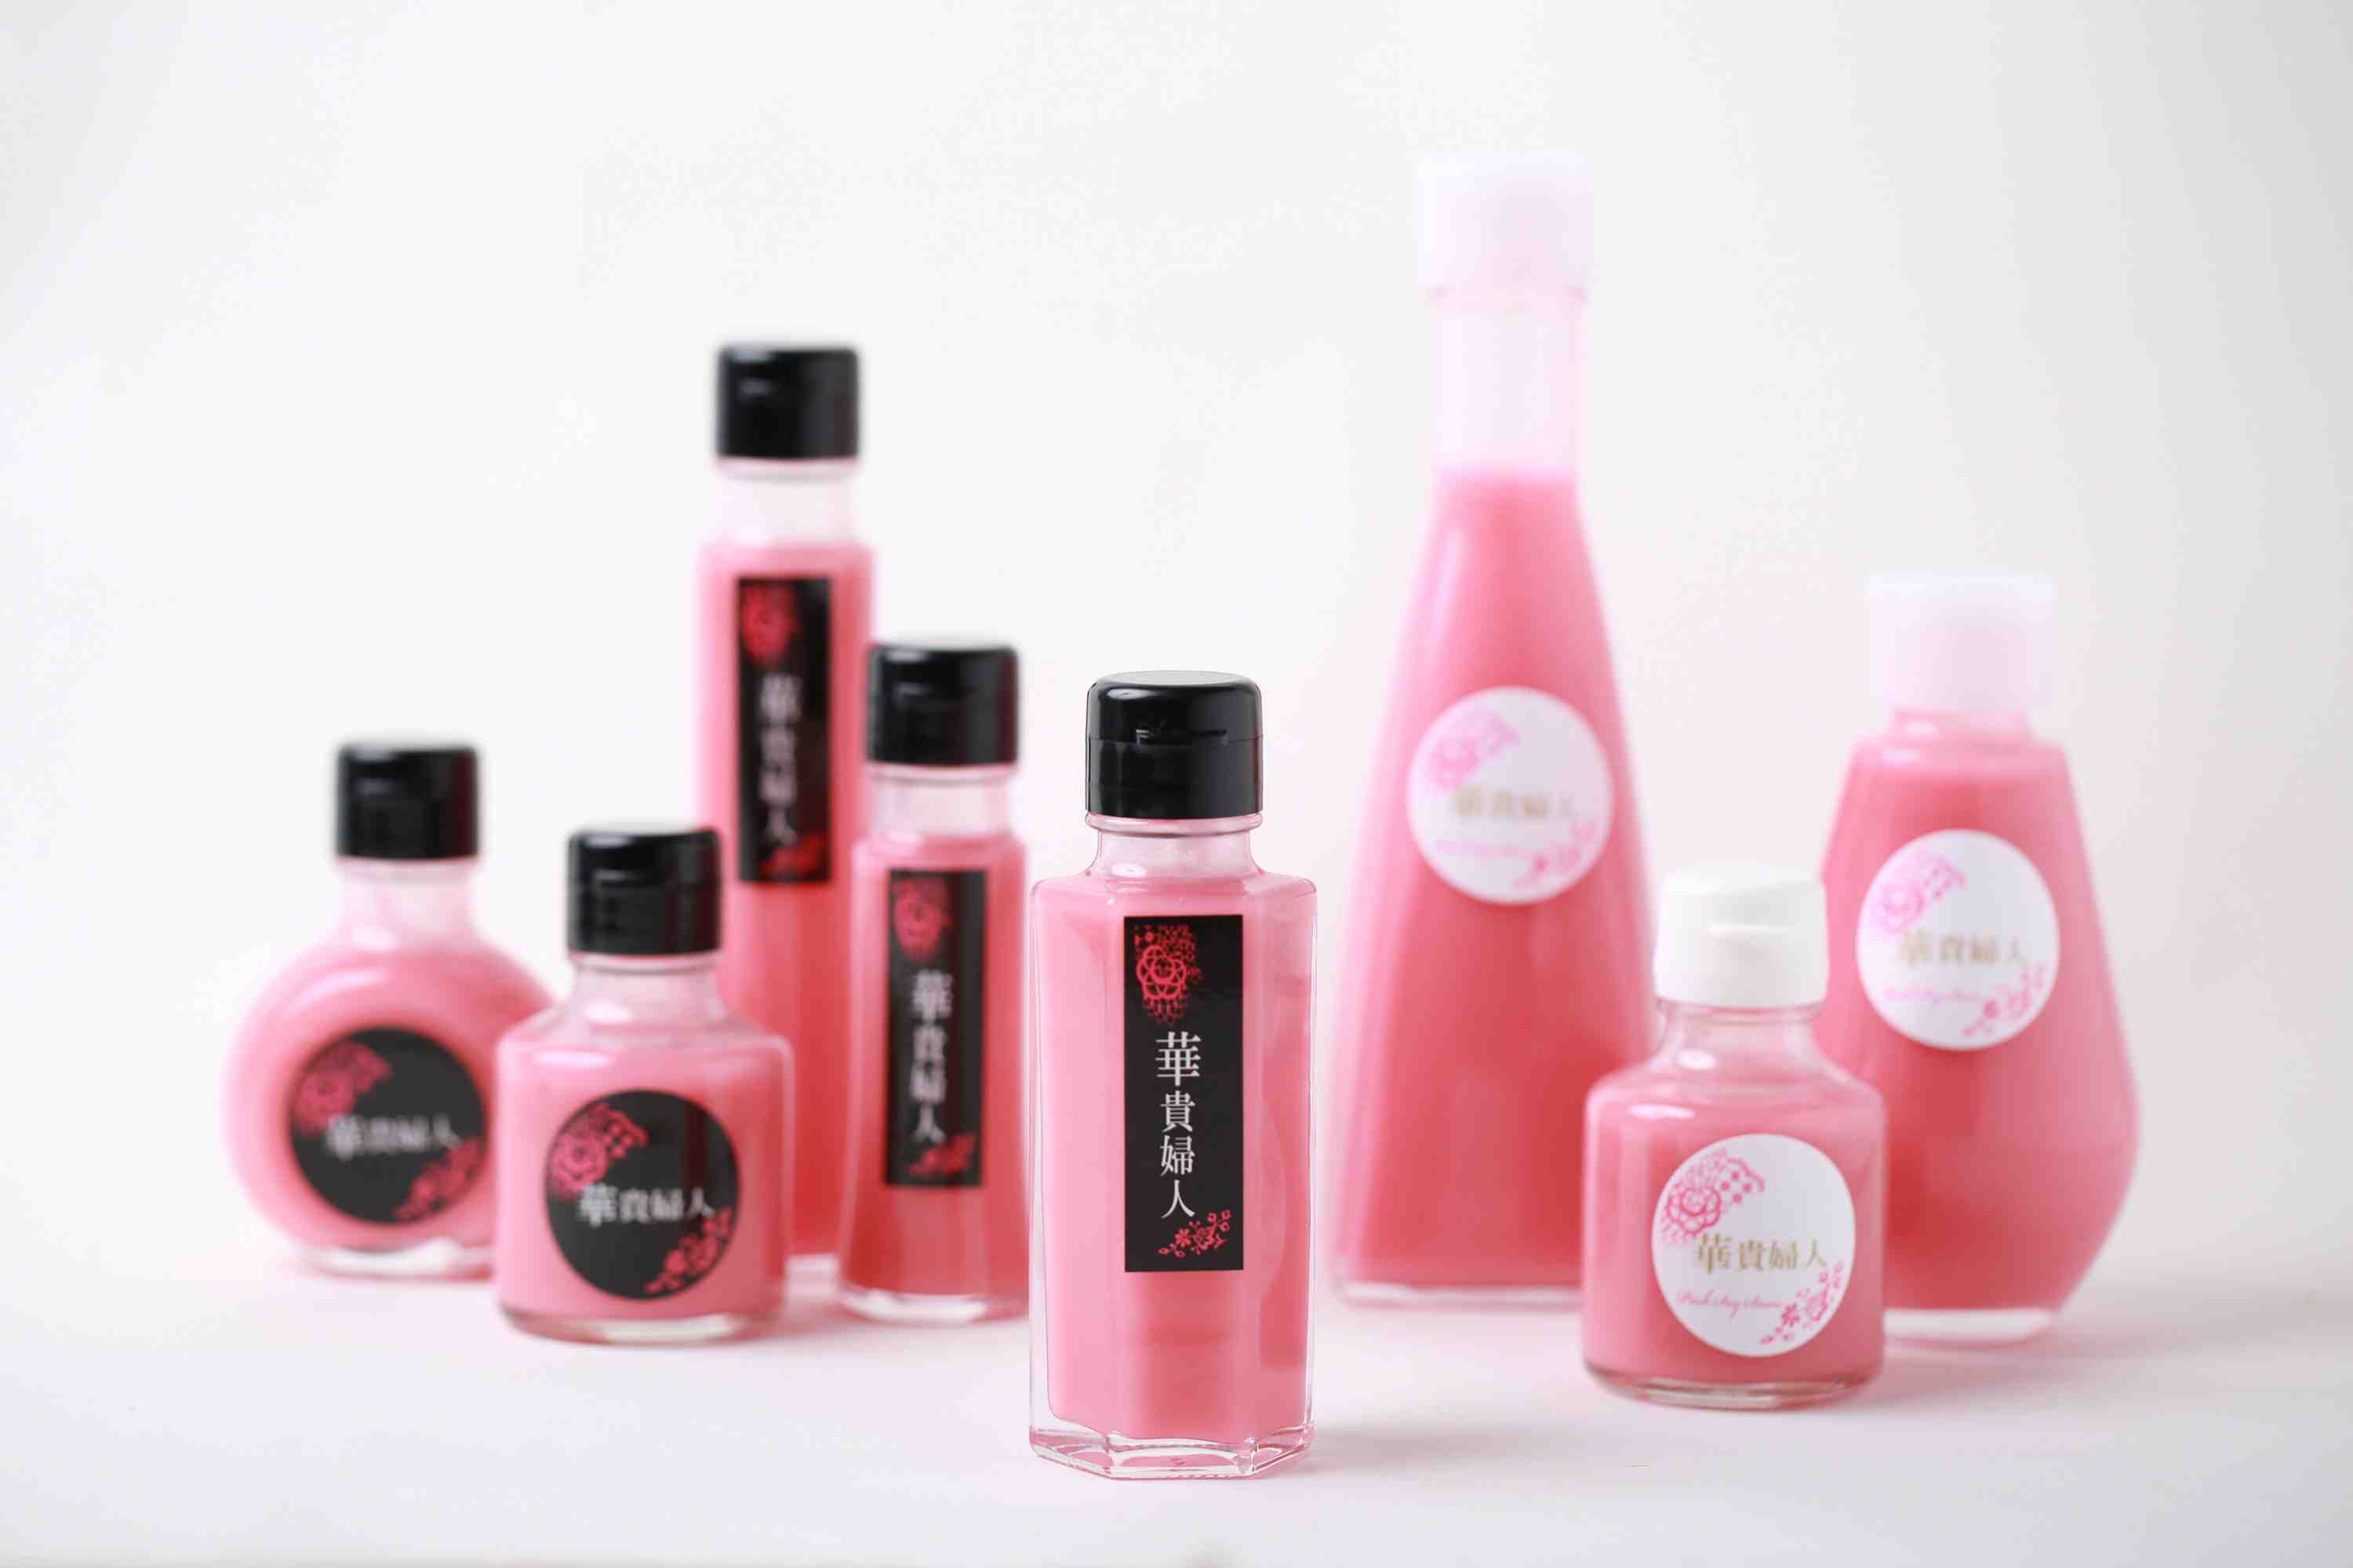 Pink products from Tottori prefecture Japan 007